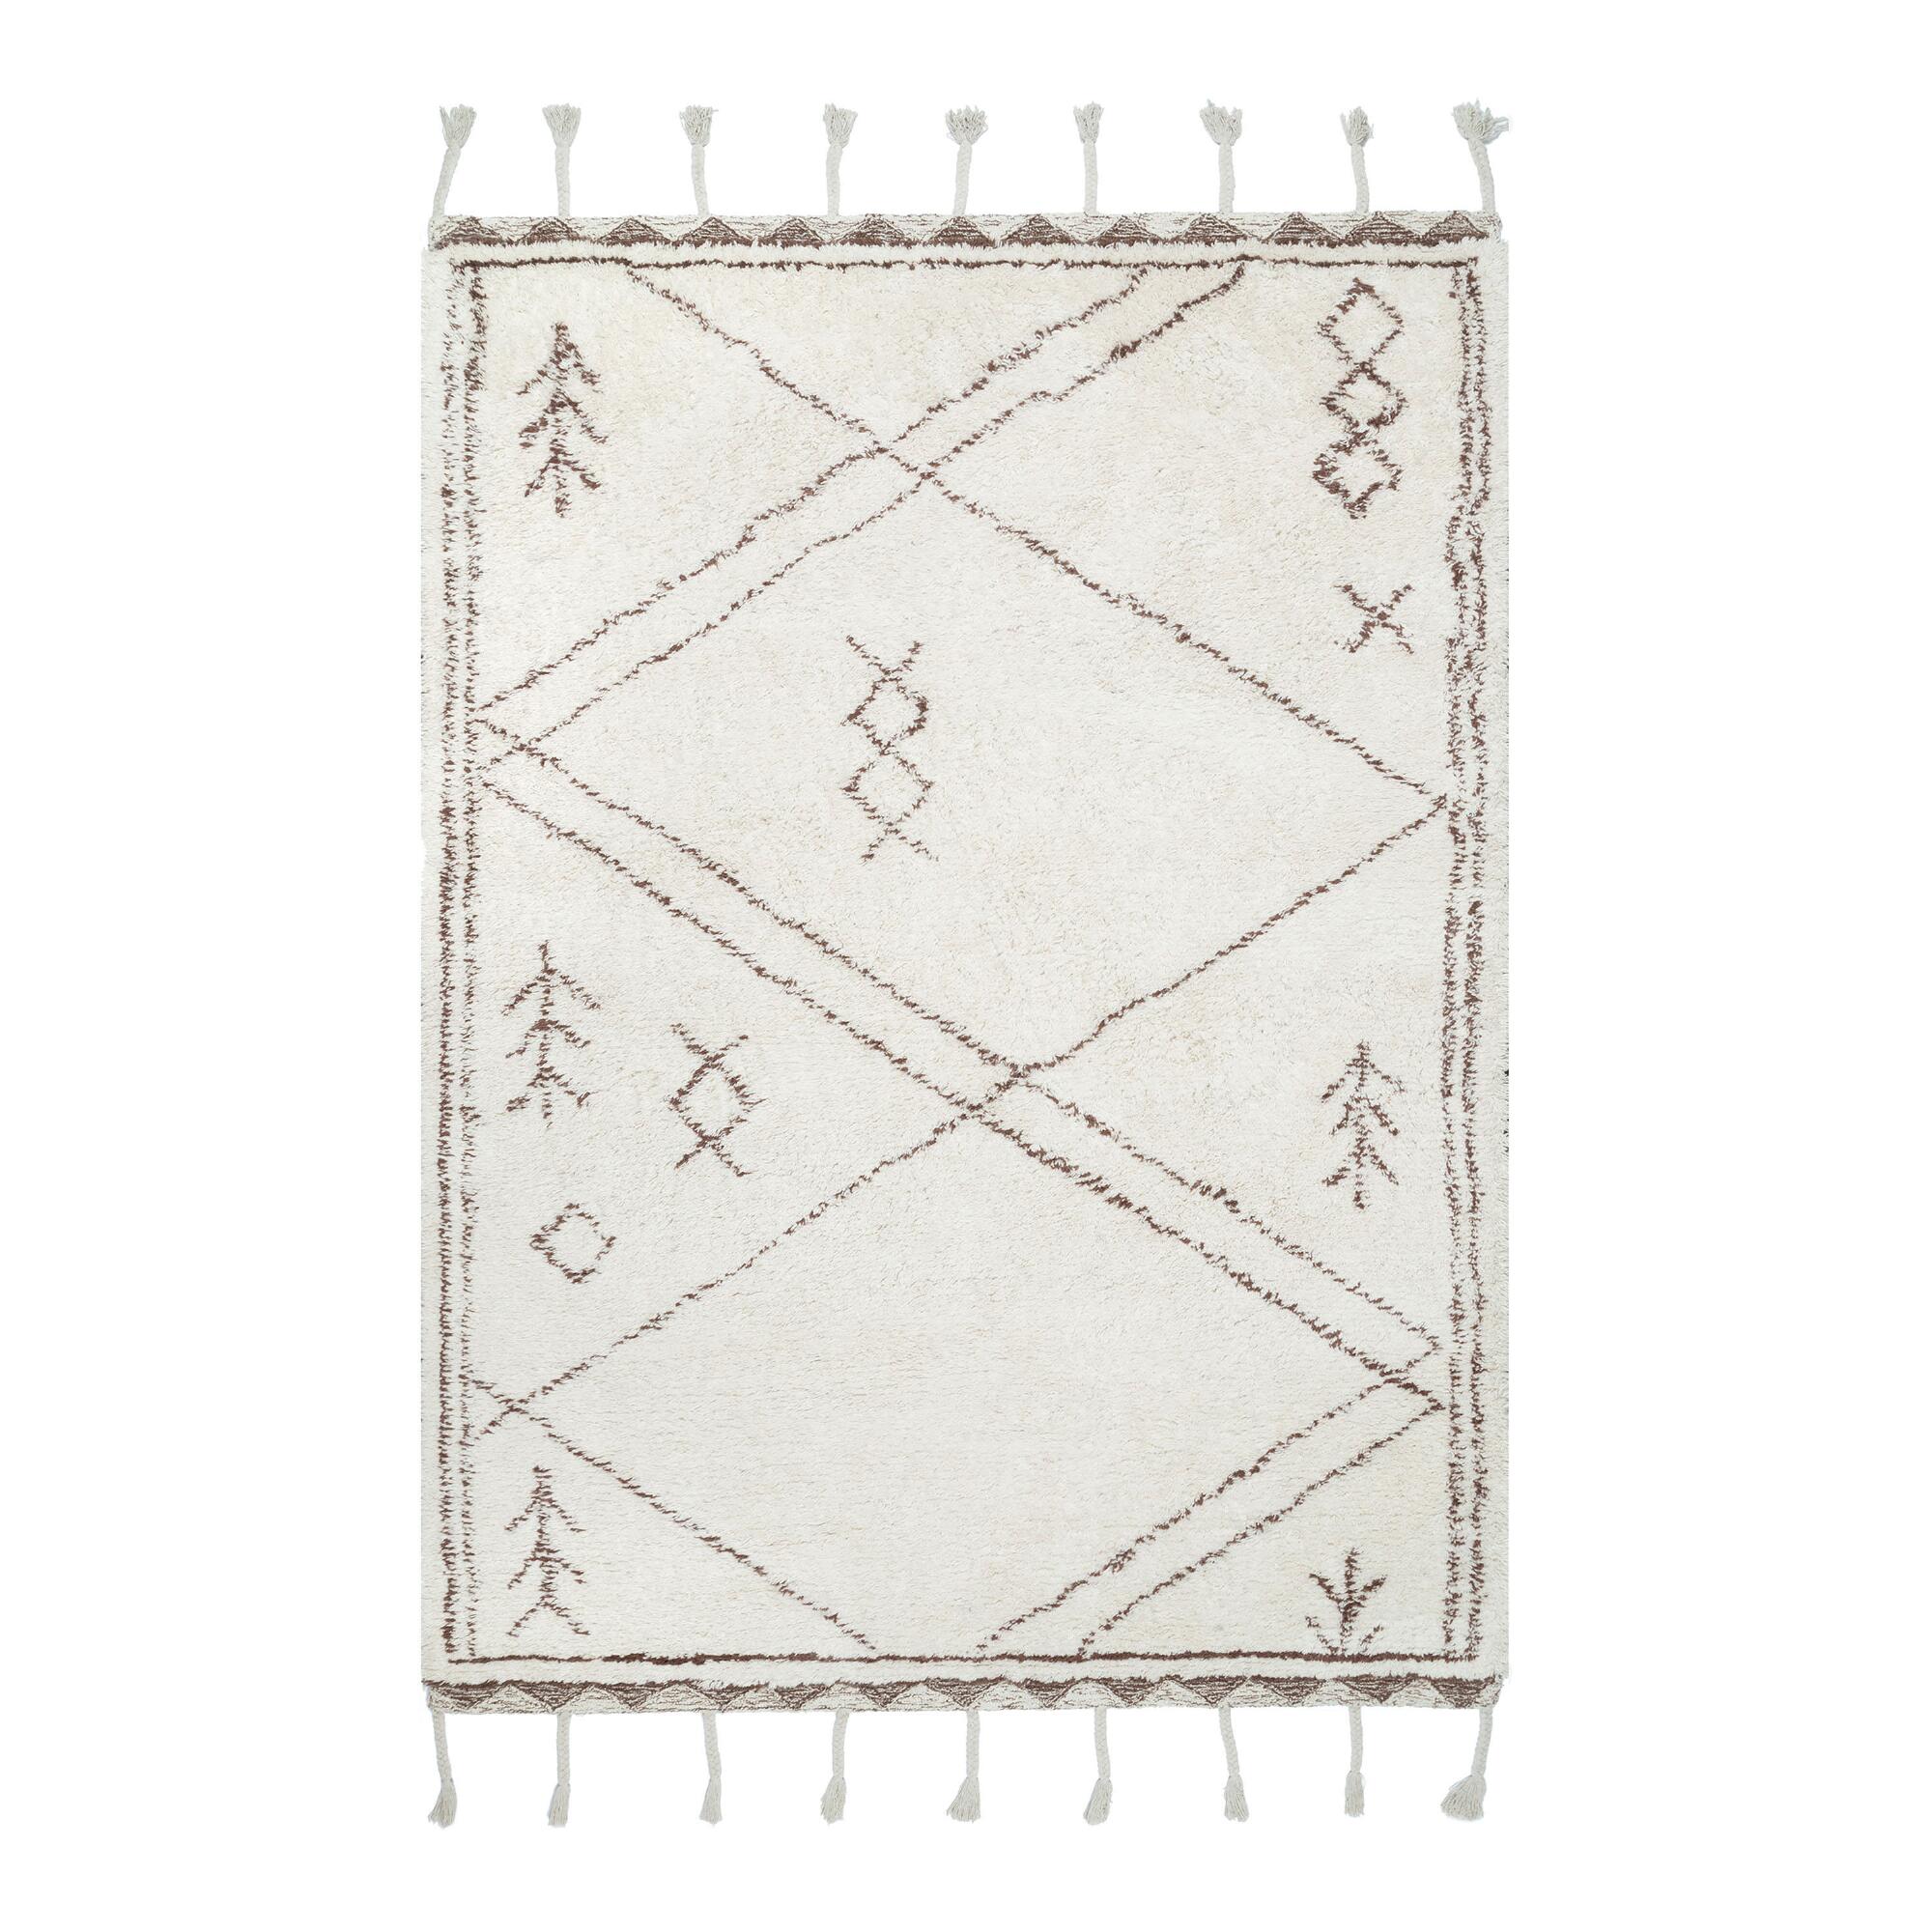 Off White And Brown Geometric Tufted Wool Taza Area Rug by World Market